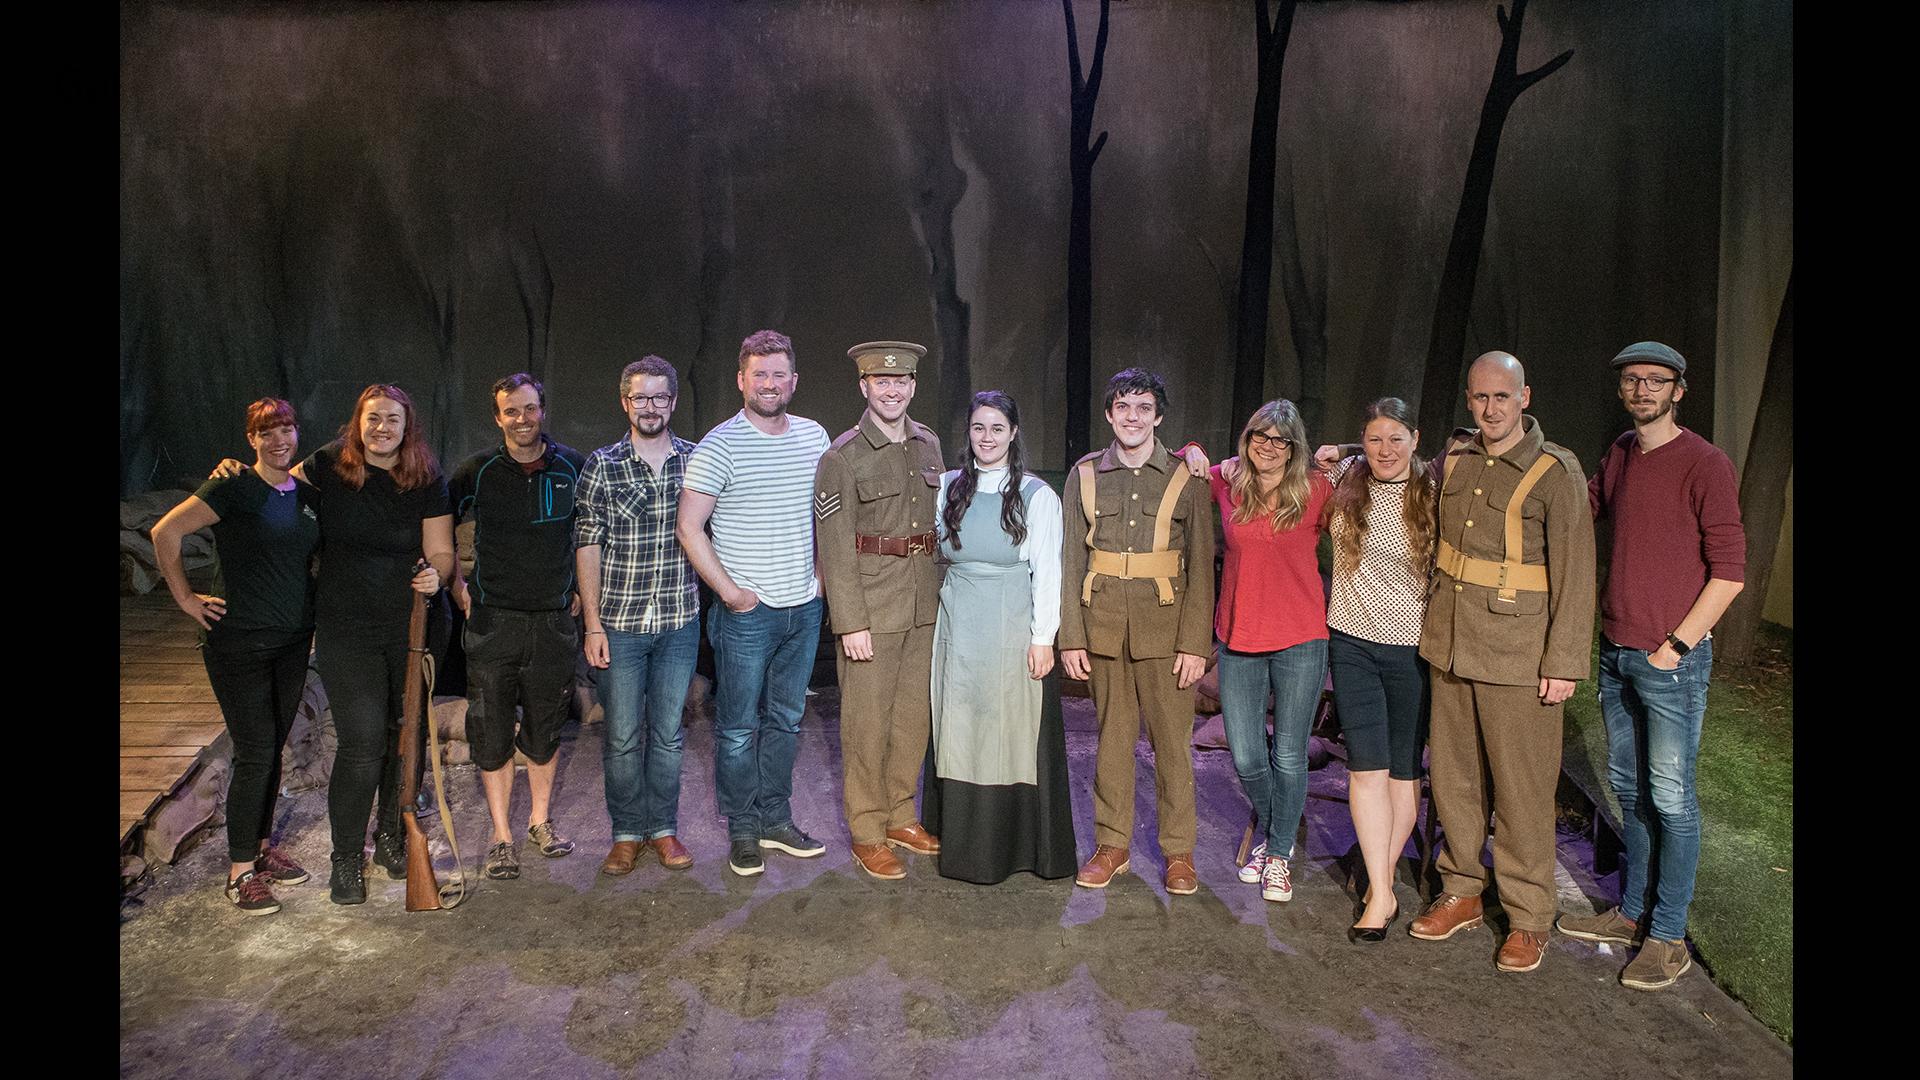 The cast and production team standing in a line smiling at the camera